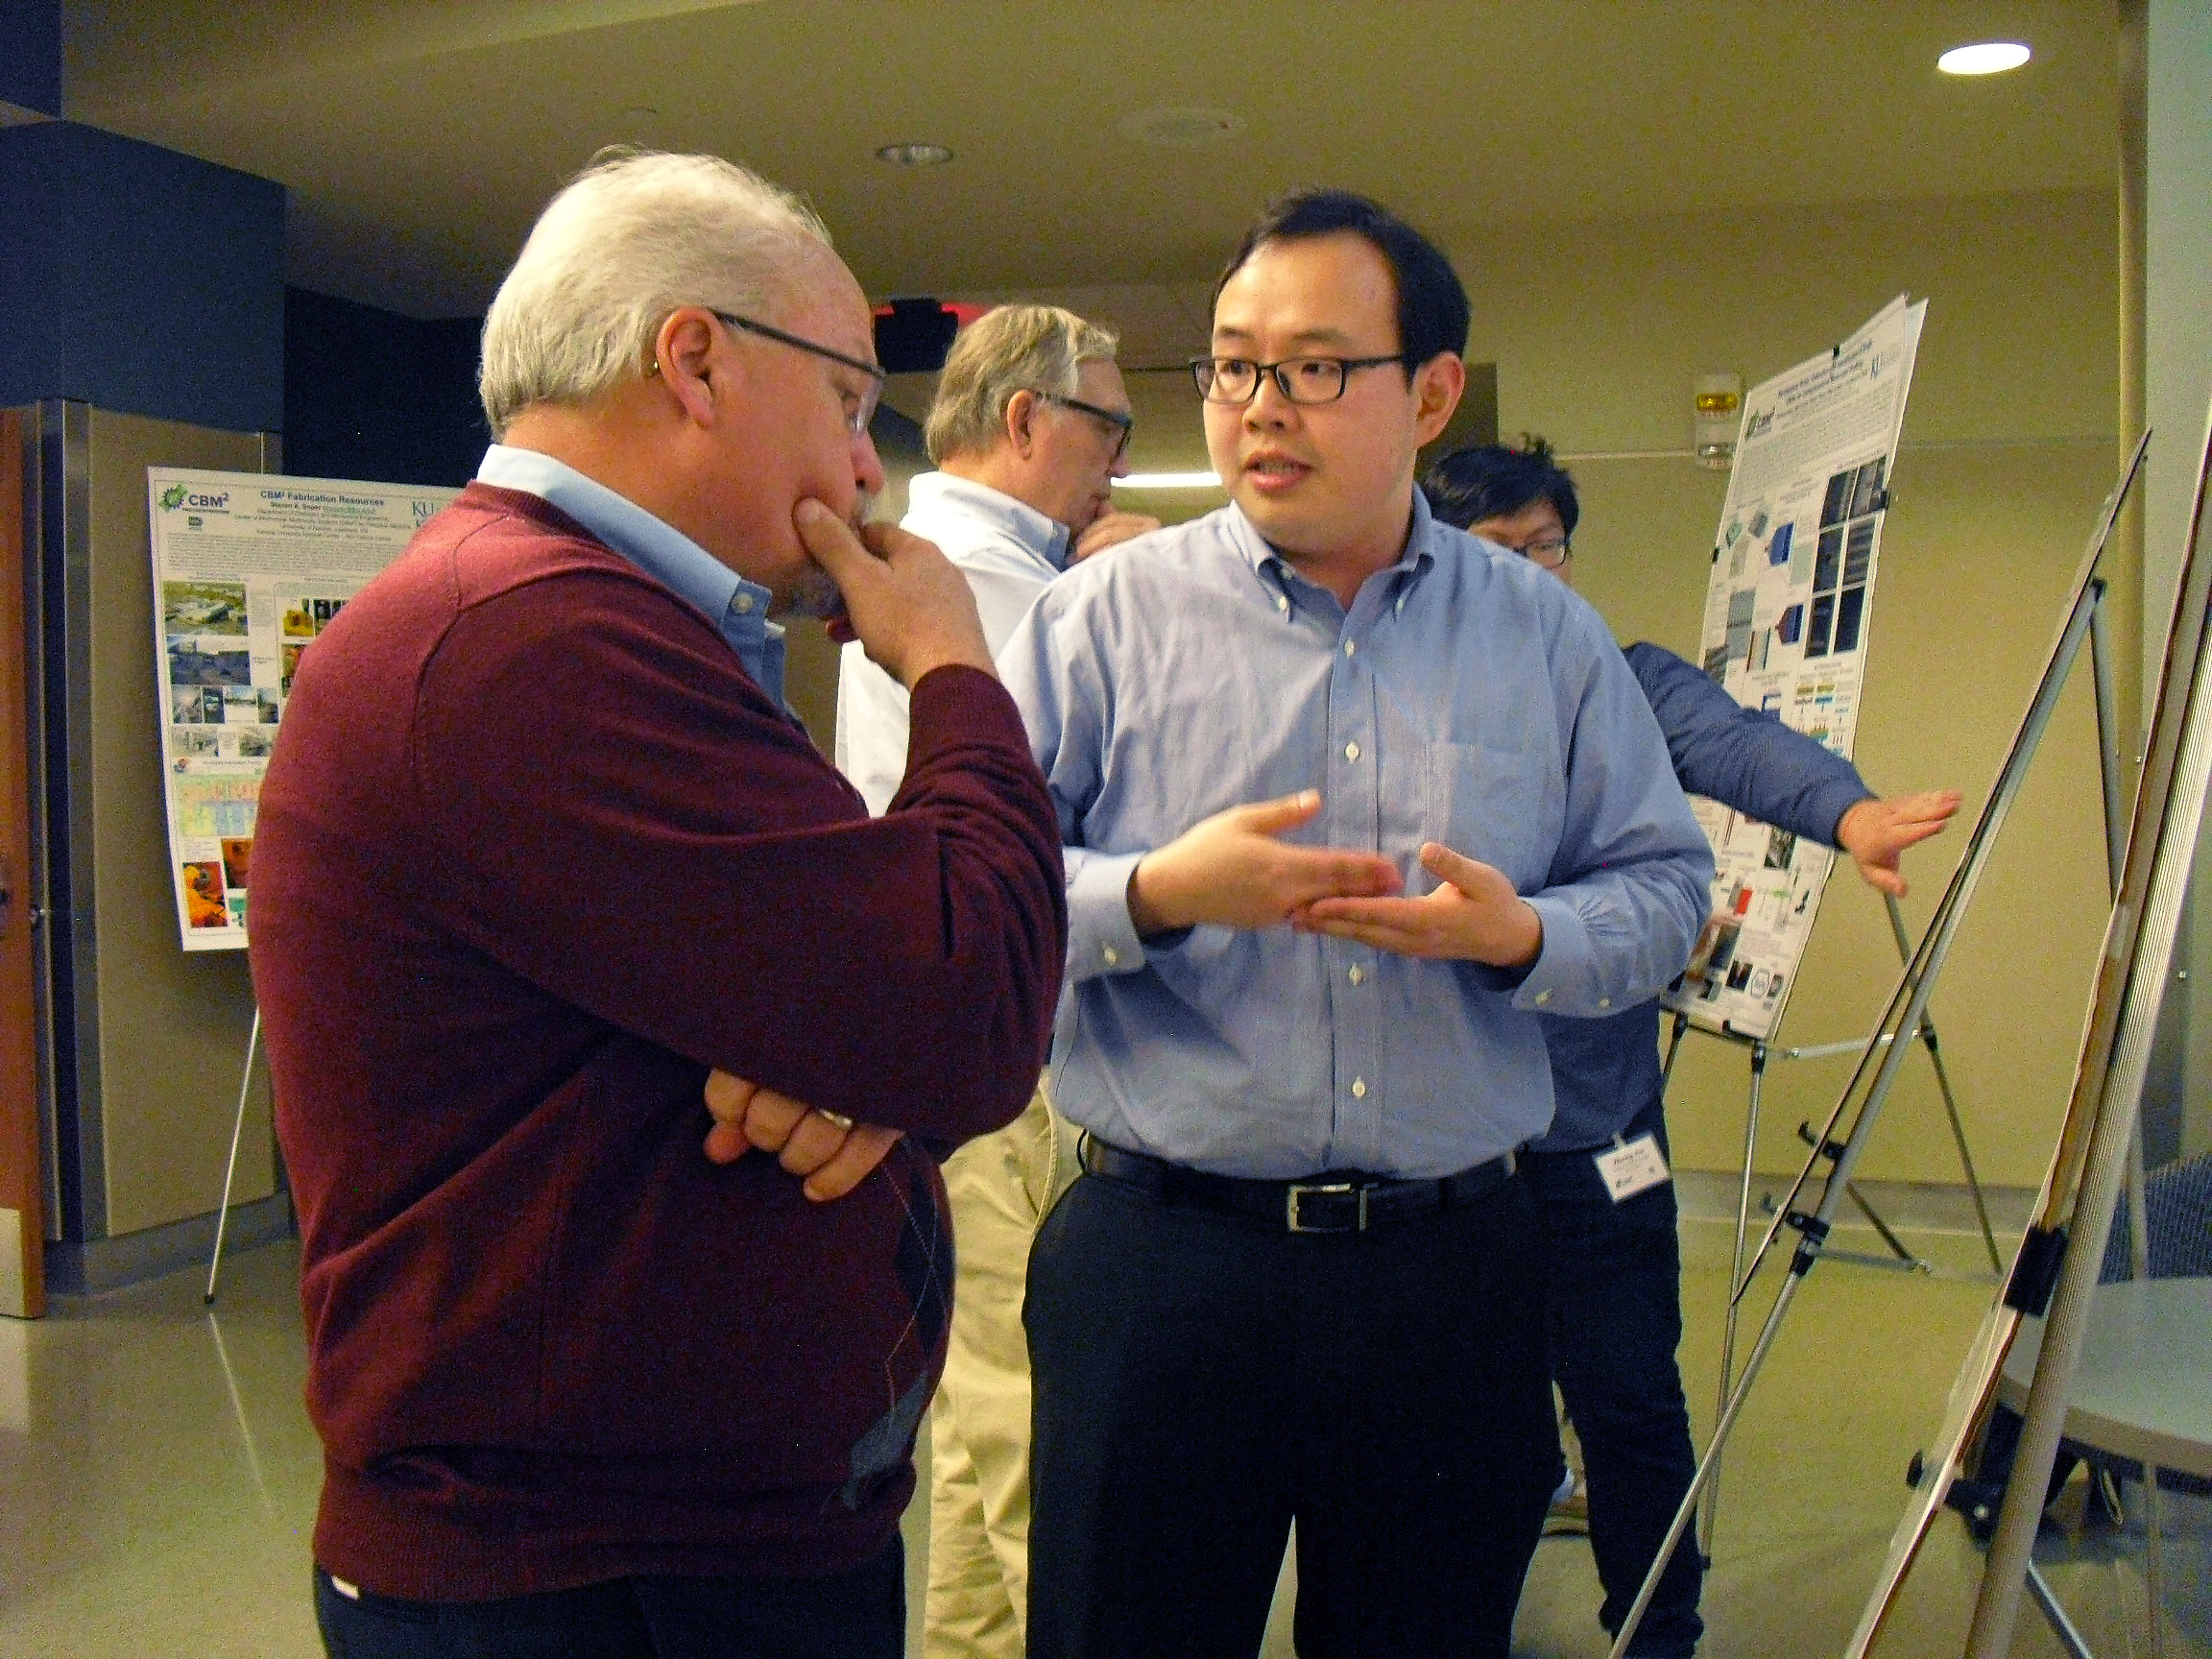 Person explaining research findings on a poster to Dr. Soper, who is attentively listening.